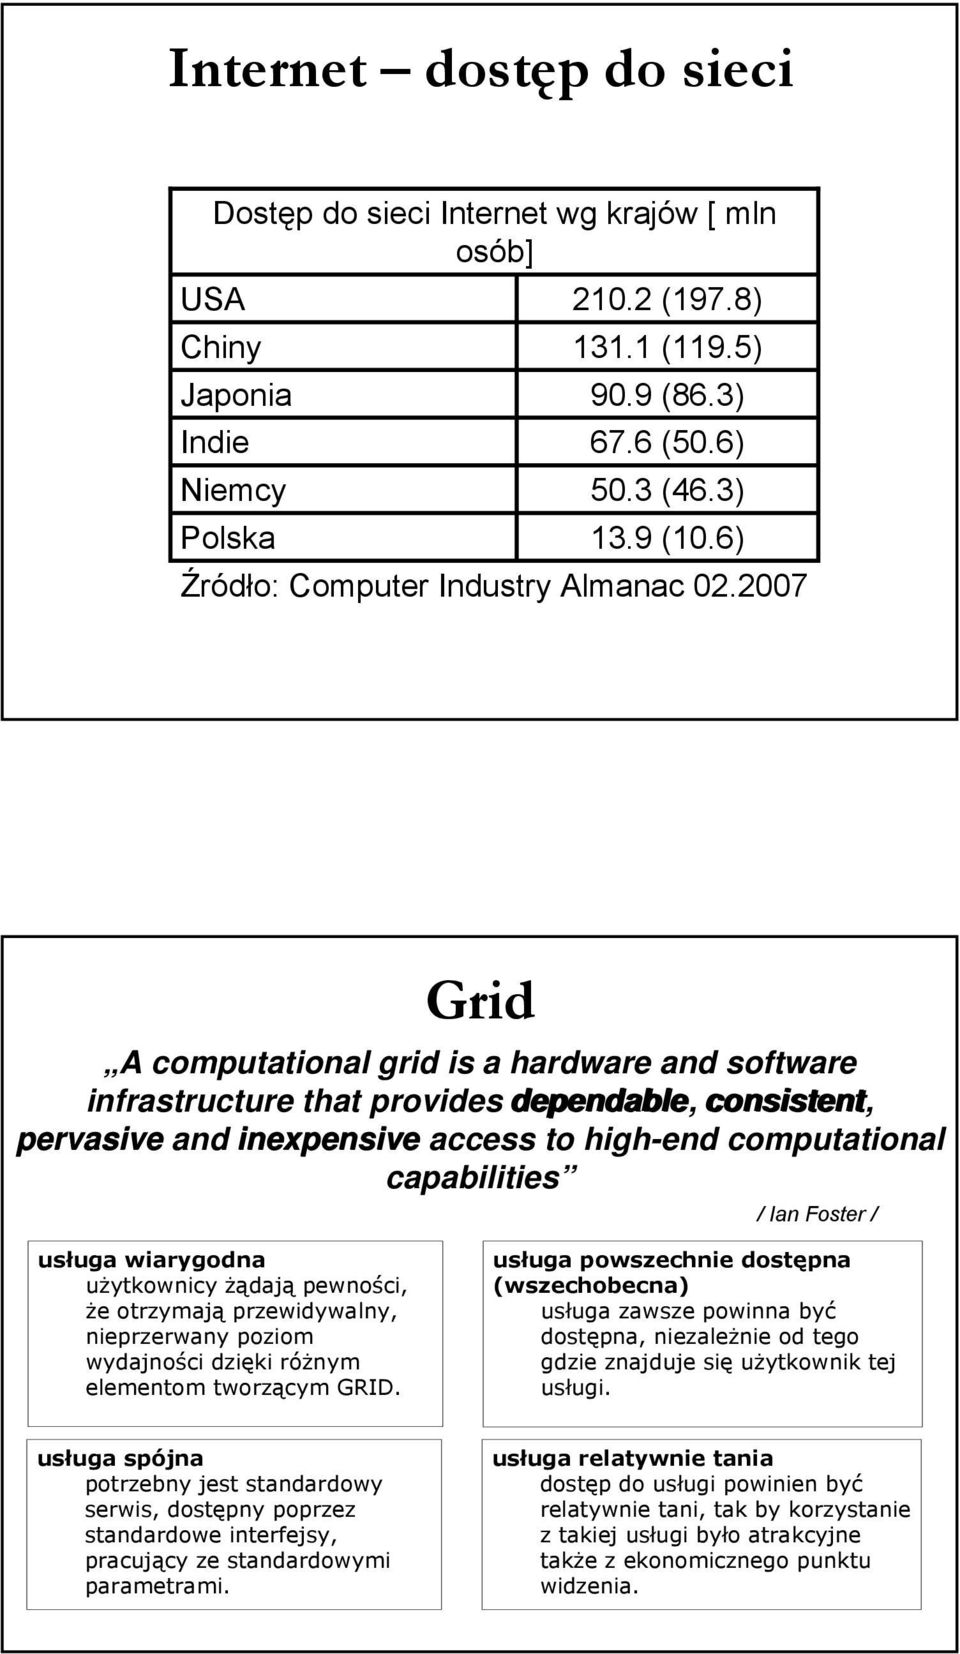 2007 Grid A computational grid is a hardware and software infrastructure that provides dependable, consistent, pervasive and inexpensive access to high-end computational capabilities / Ian Foster /